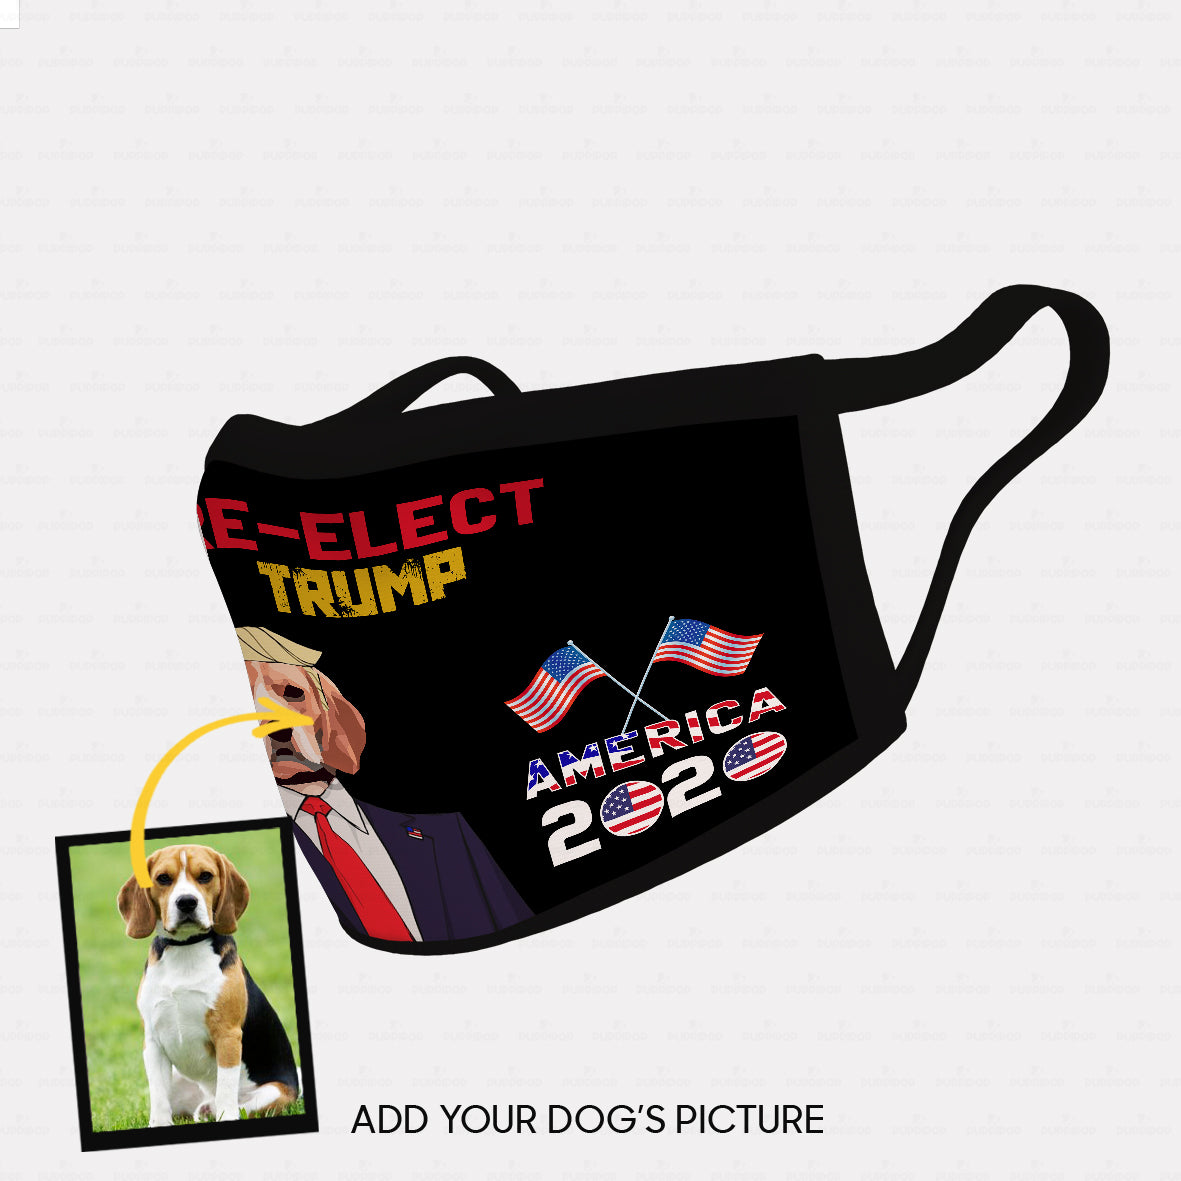 Personalized Dog Gift Idea - Re-Elect Trump 2020 For Dog Lovers - Cloth Mask